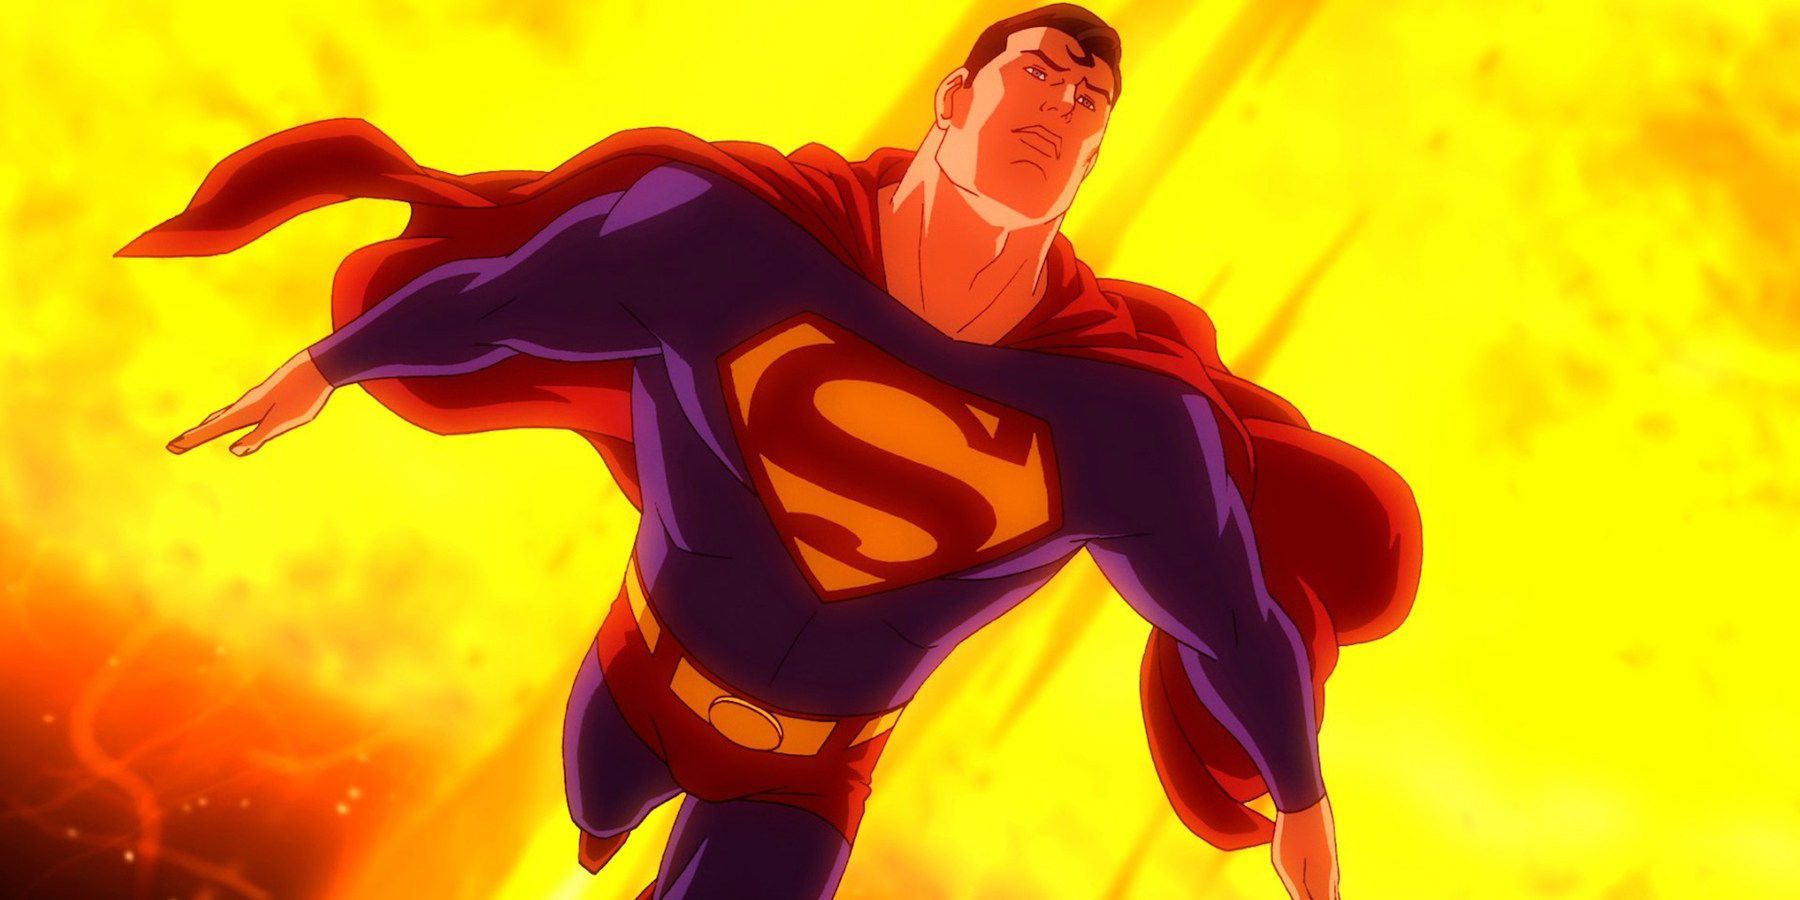 10 Most Powerful Superheroes From Marvel and DC